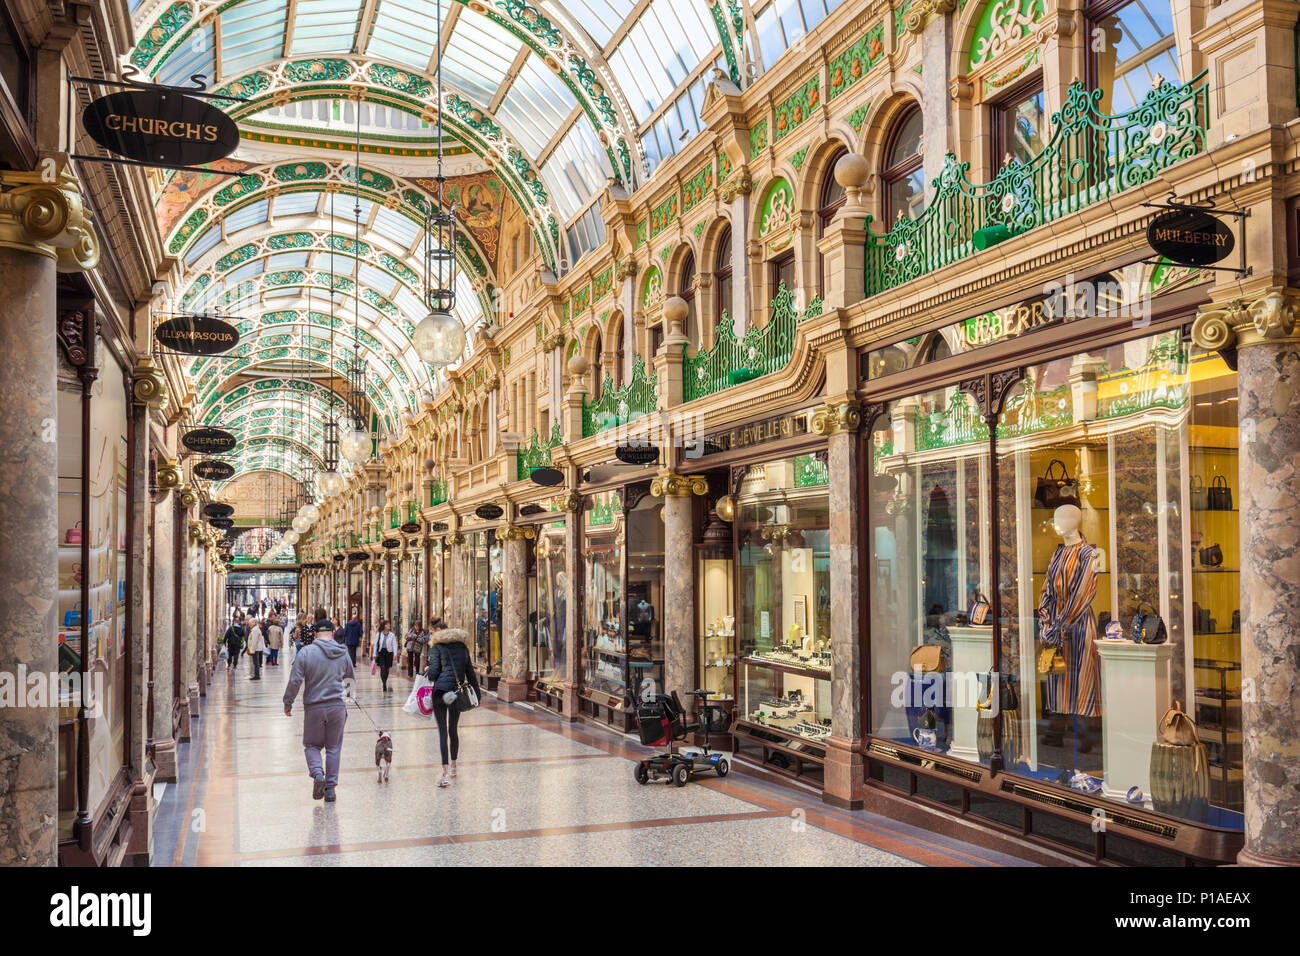 Yorkshire Leeds Yorkshire County Arcade Shopping Victoria